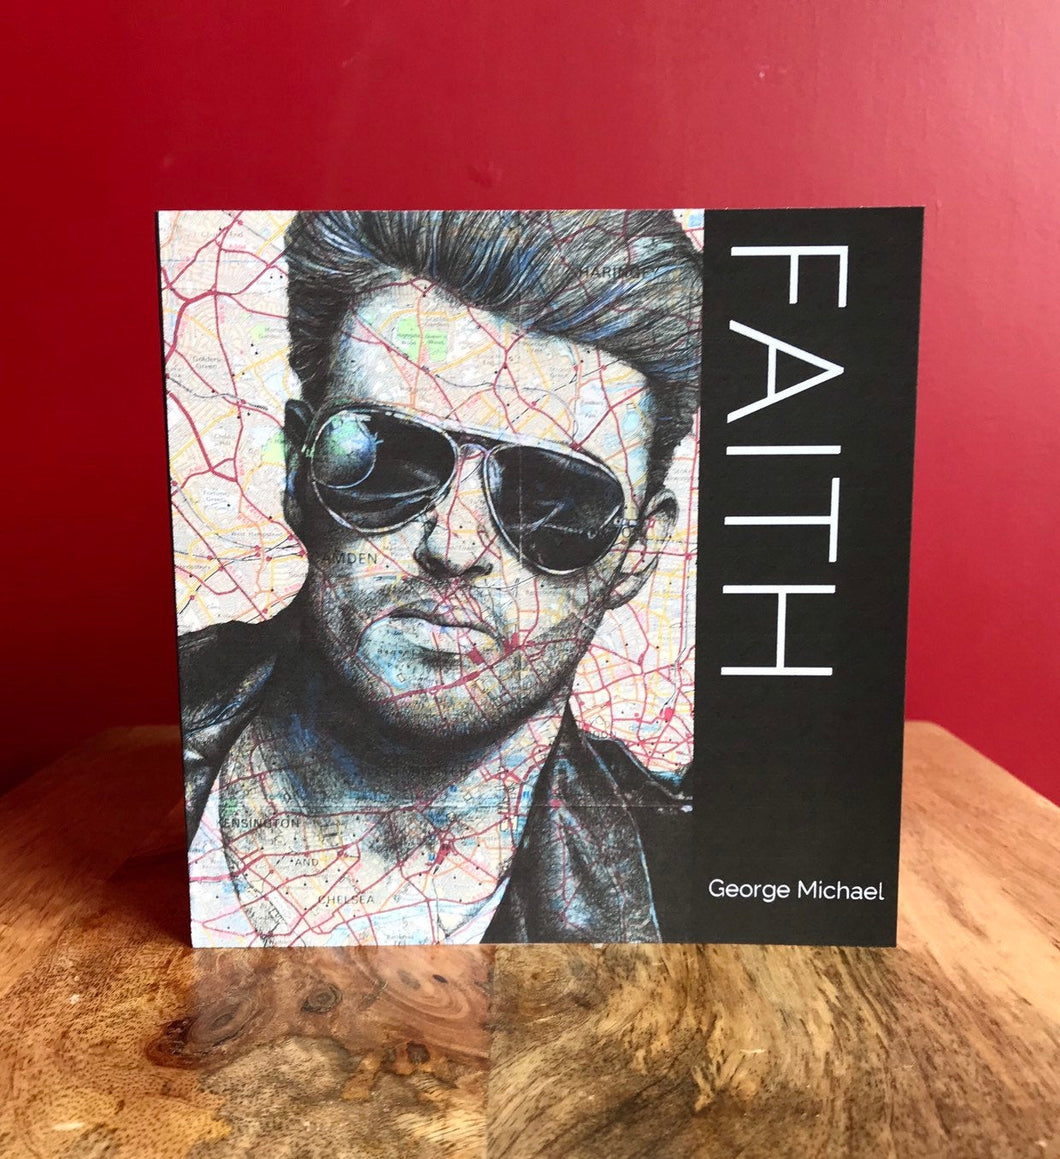 George Michael Greeting Card. Printed Drawing Over Map of London.Blank inside